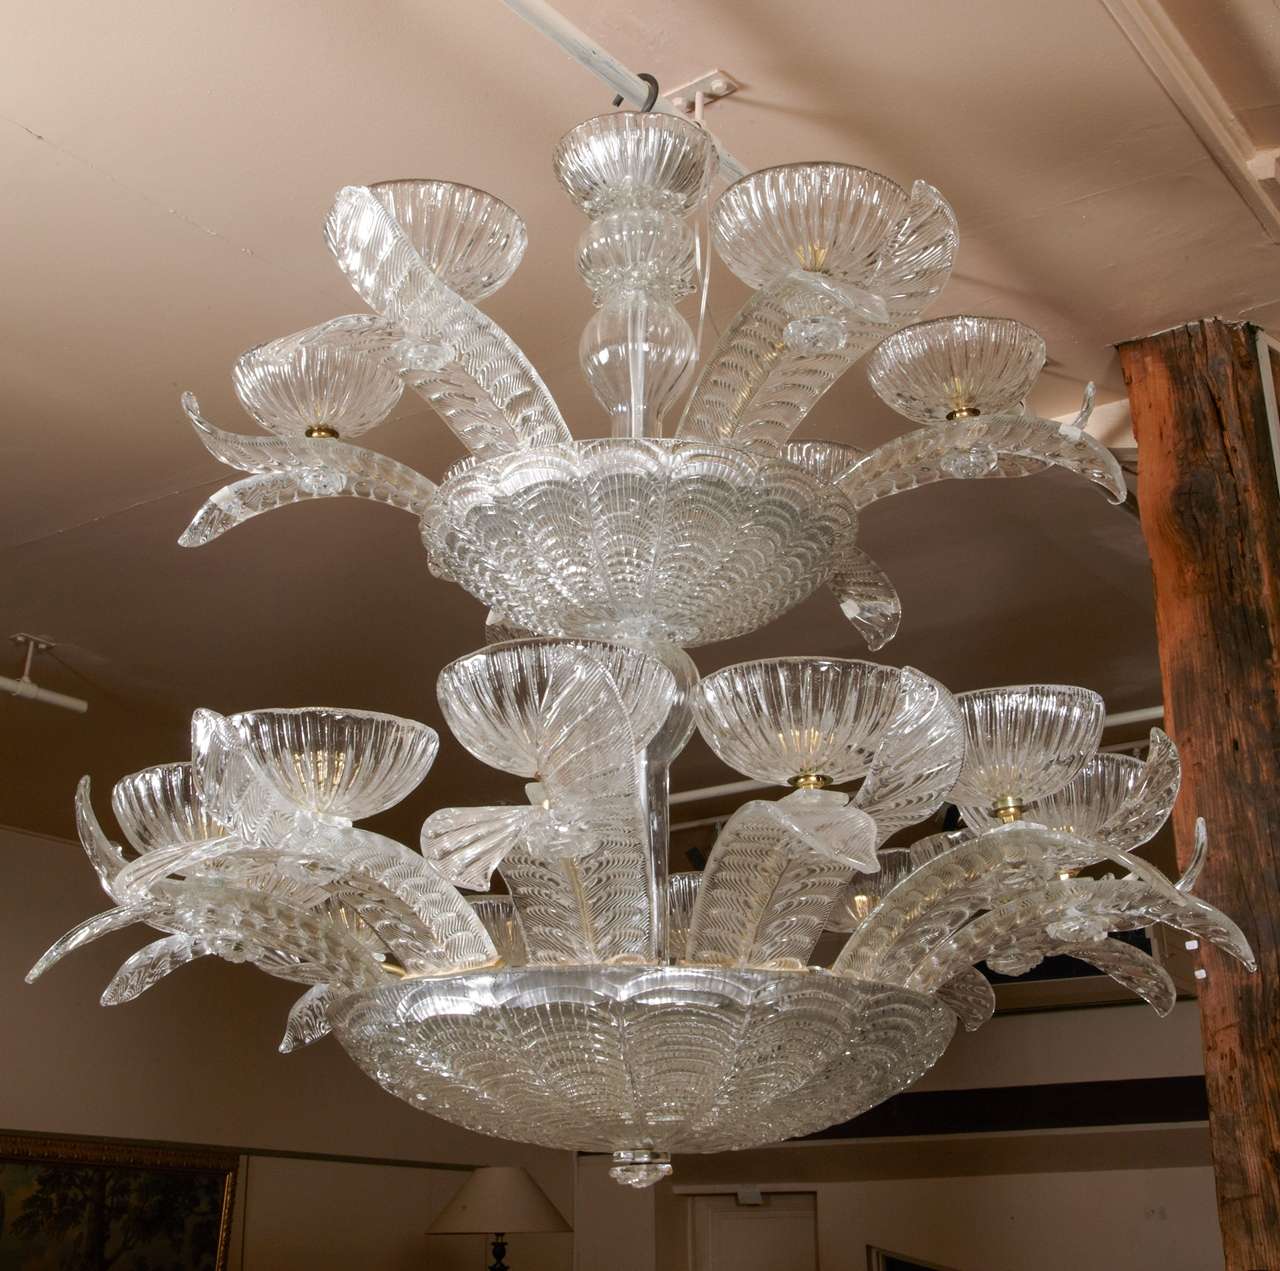 Murano glass chandeliers, two levels, 18 light branches, inside lighting